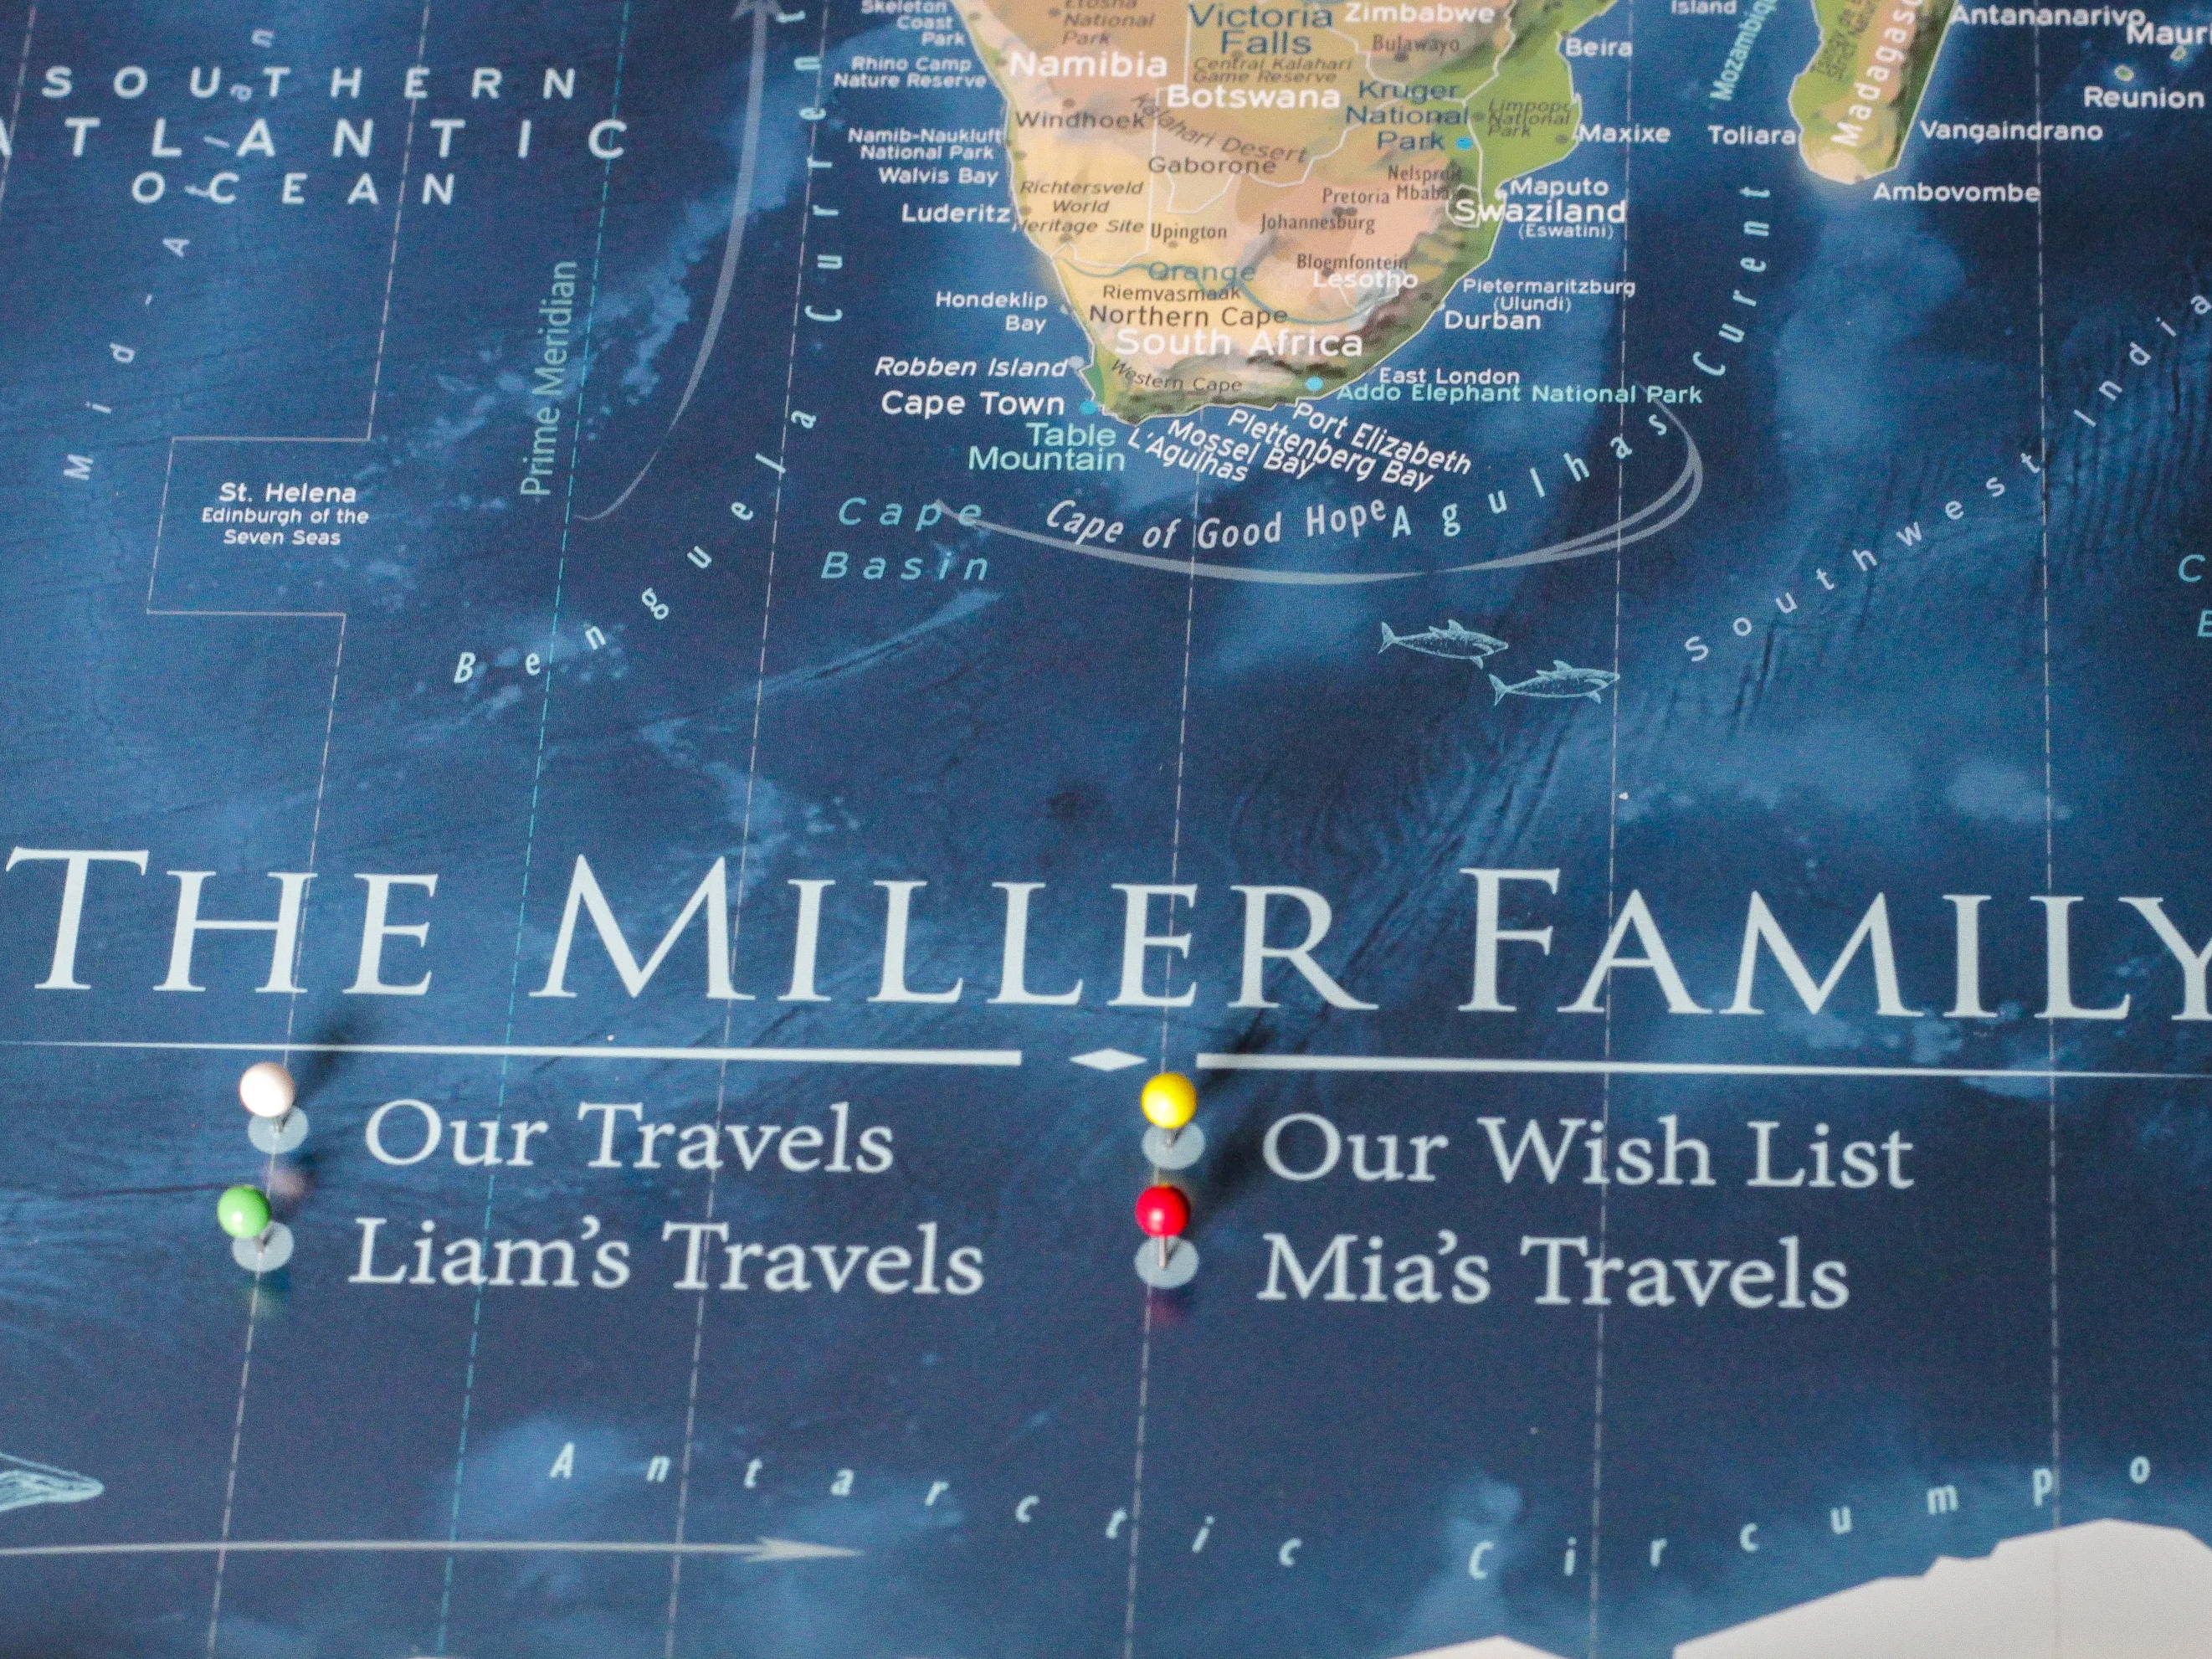 Family travels world map